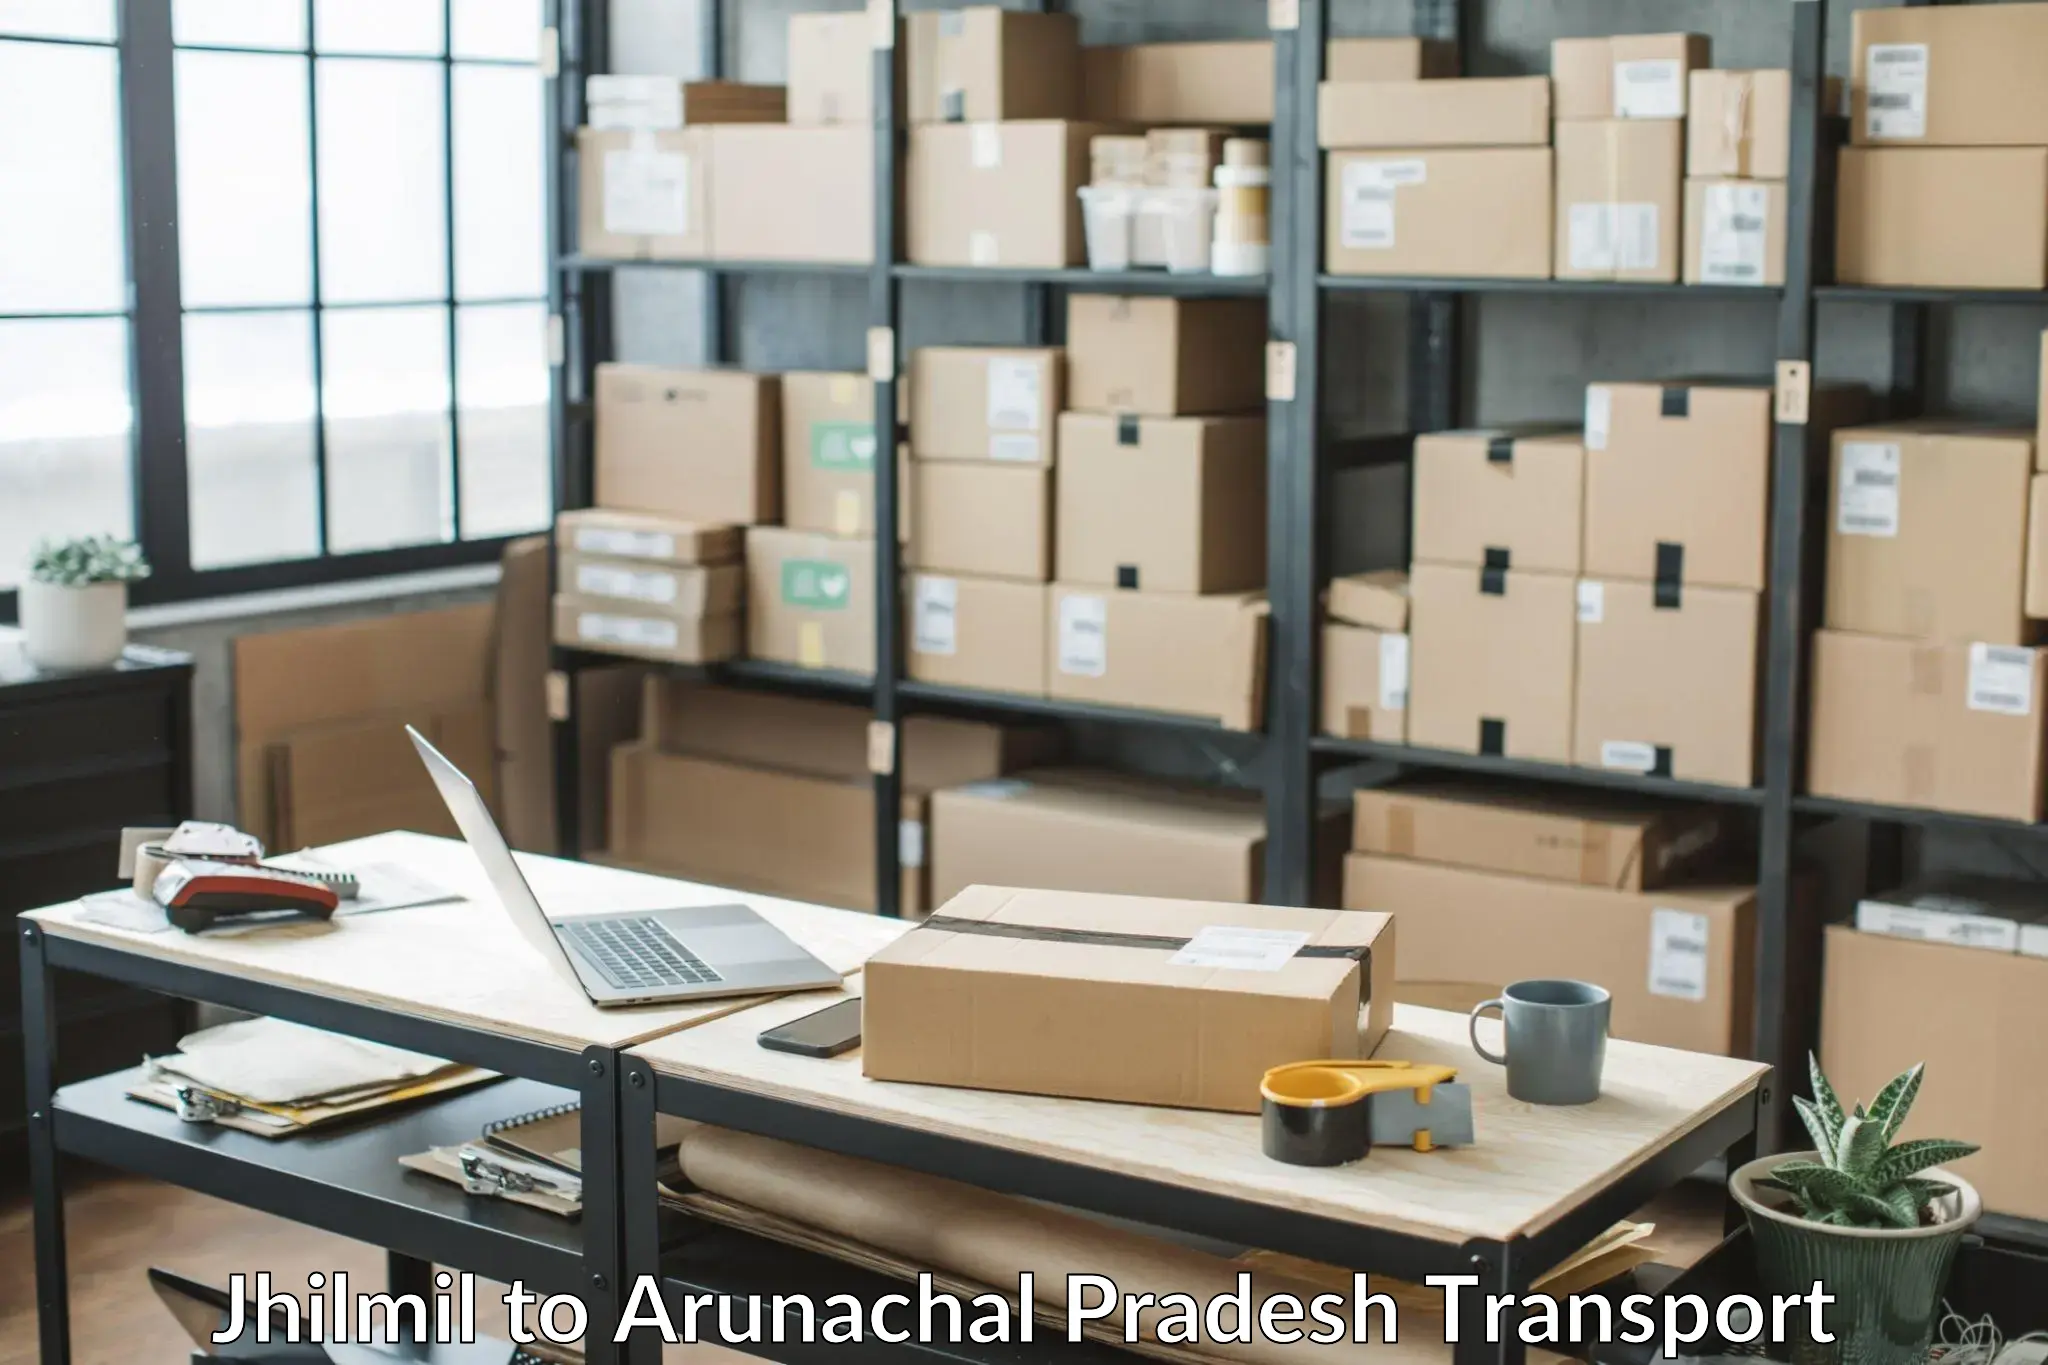 Truck transport companies in India Jhilmil to Changlang